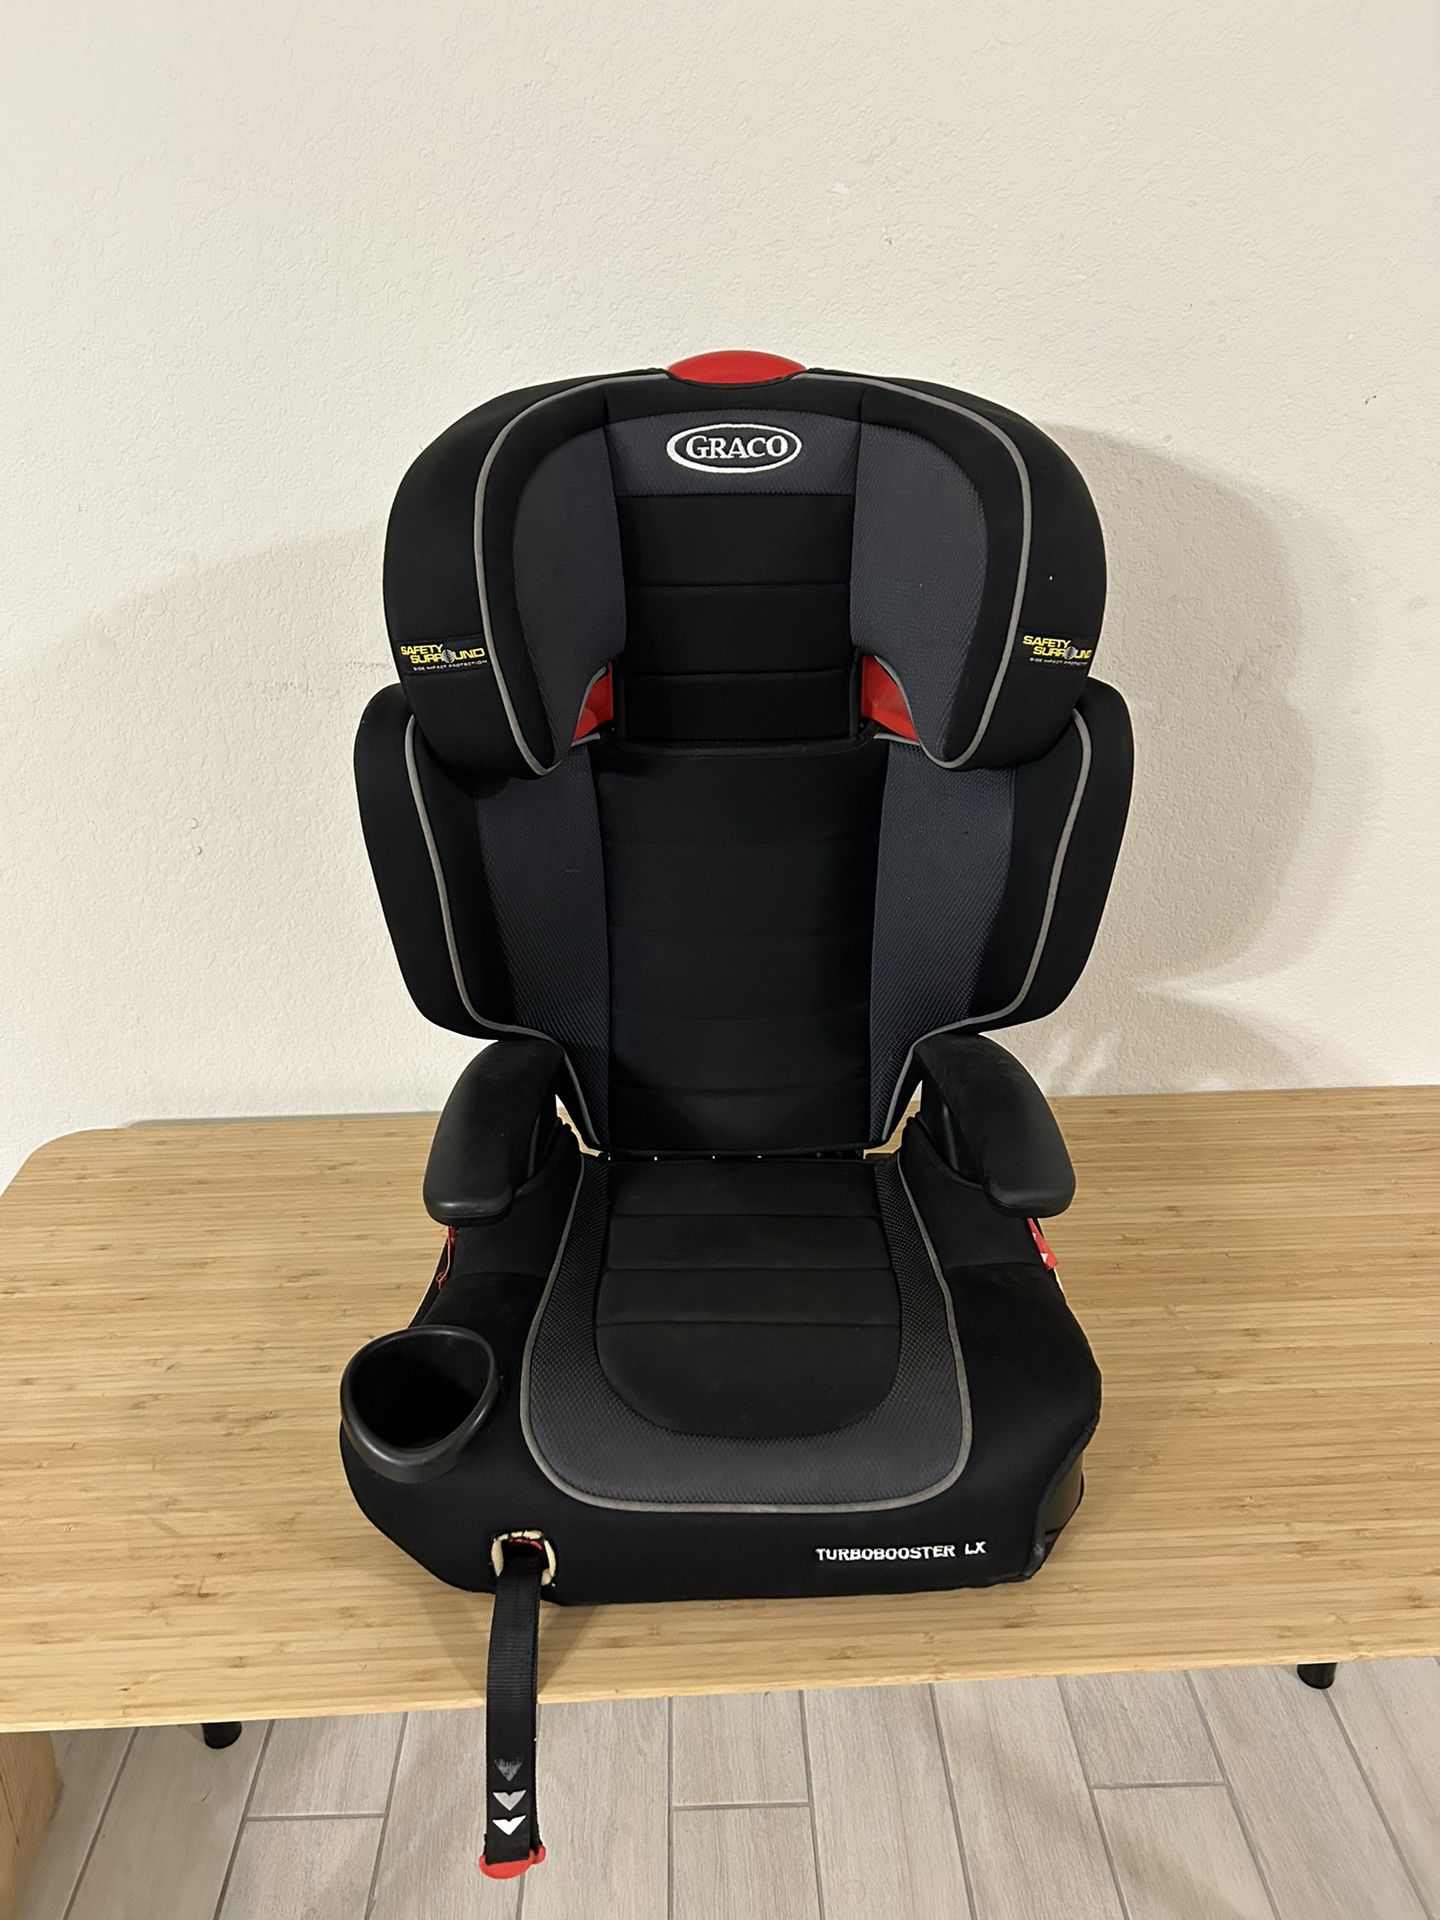 Car Seat For Small Children